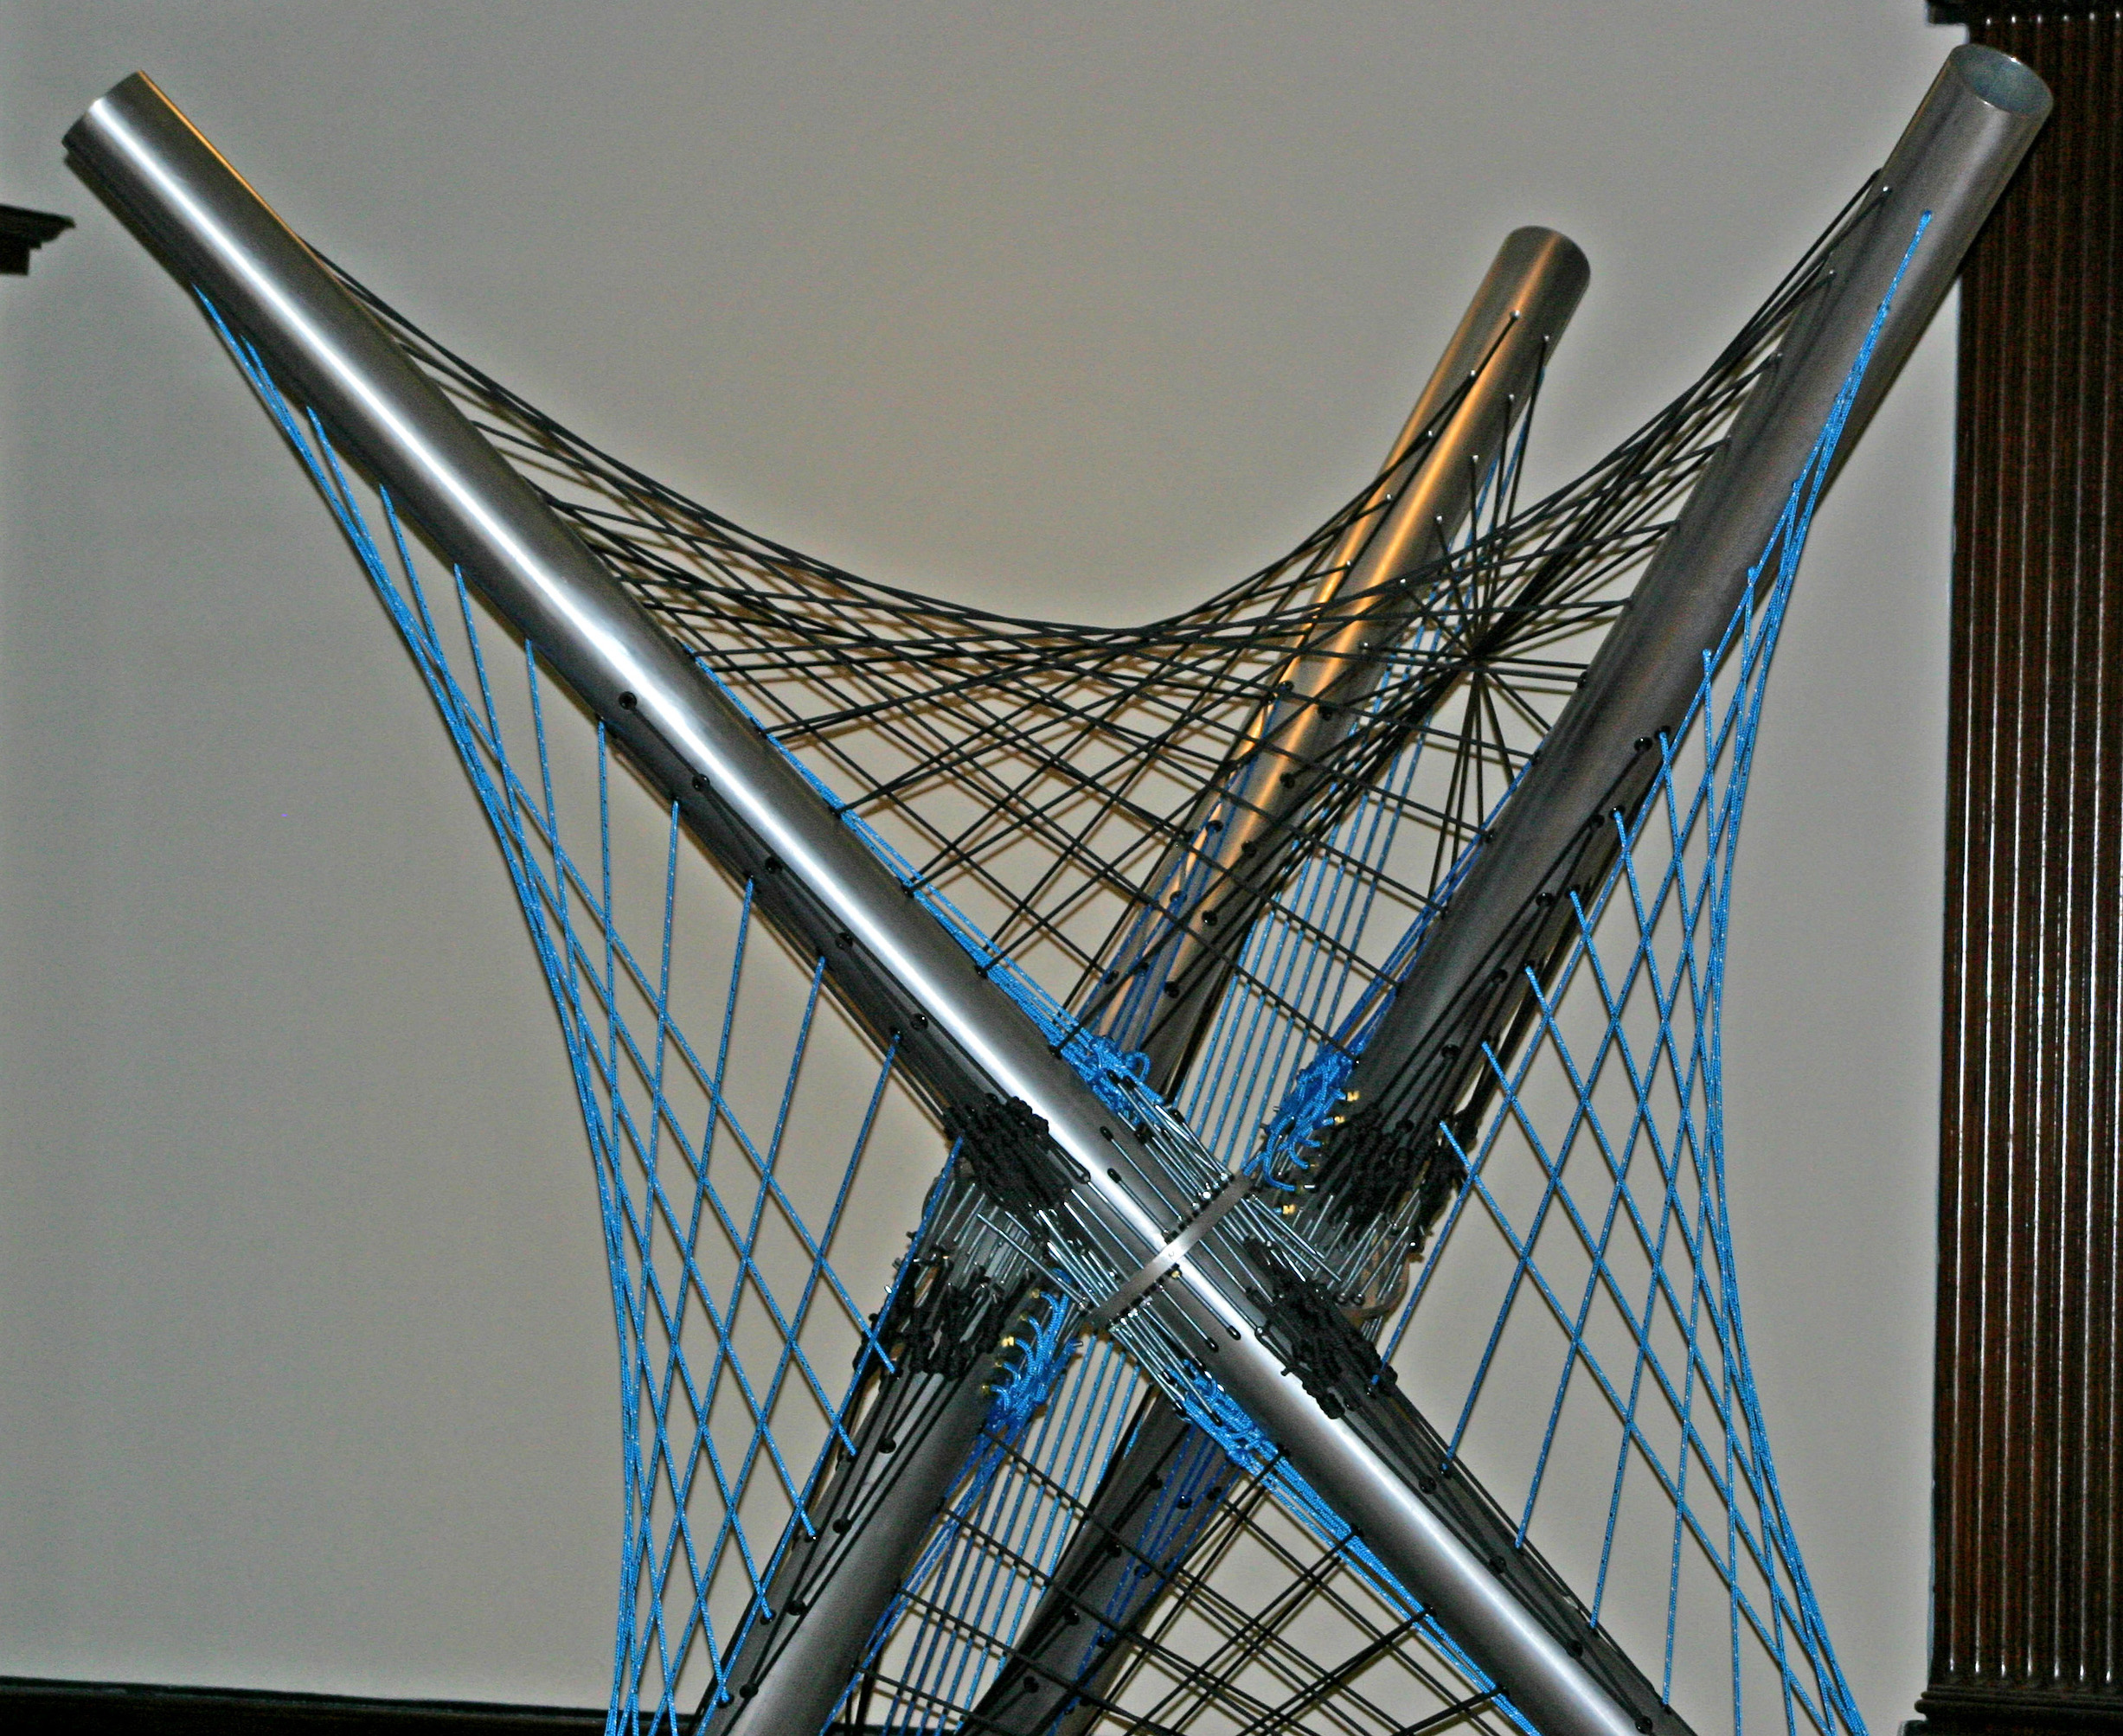 Rope and Sound Interactive Tensegrity Sculpture